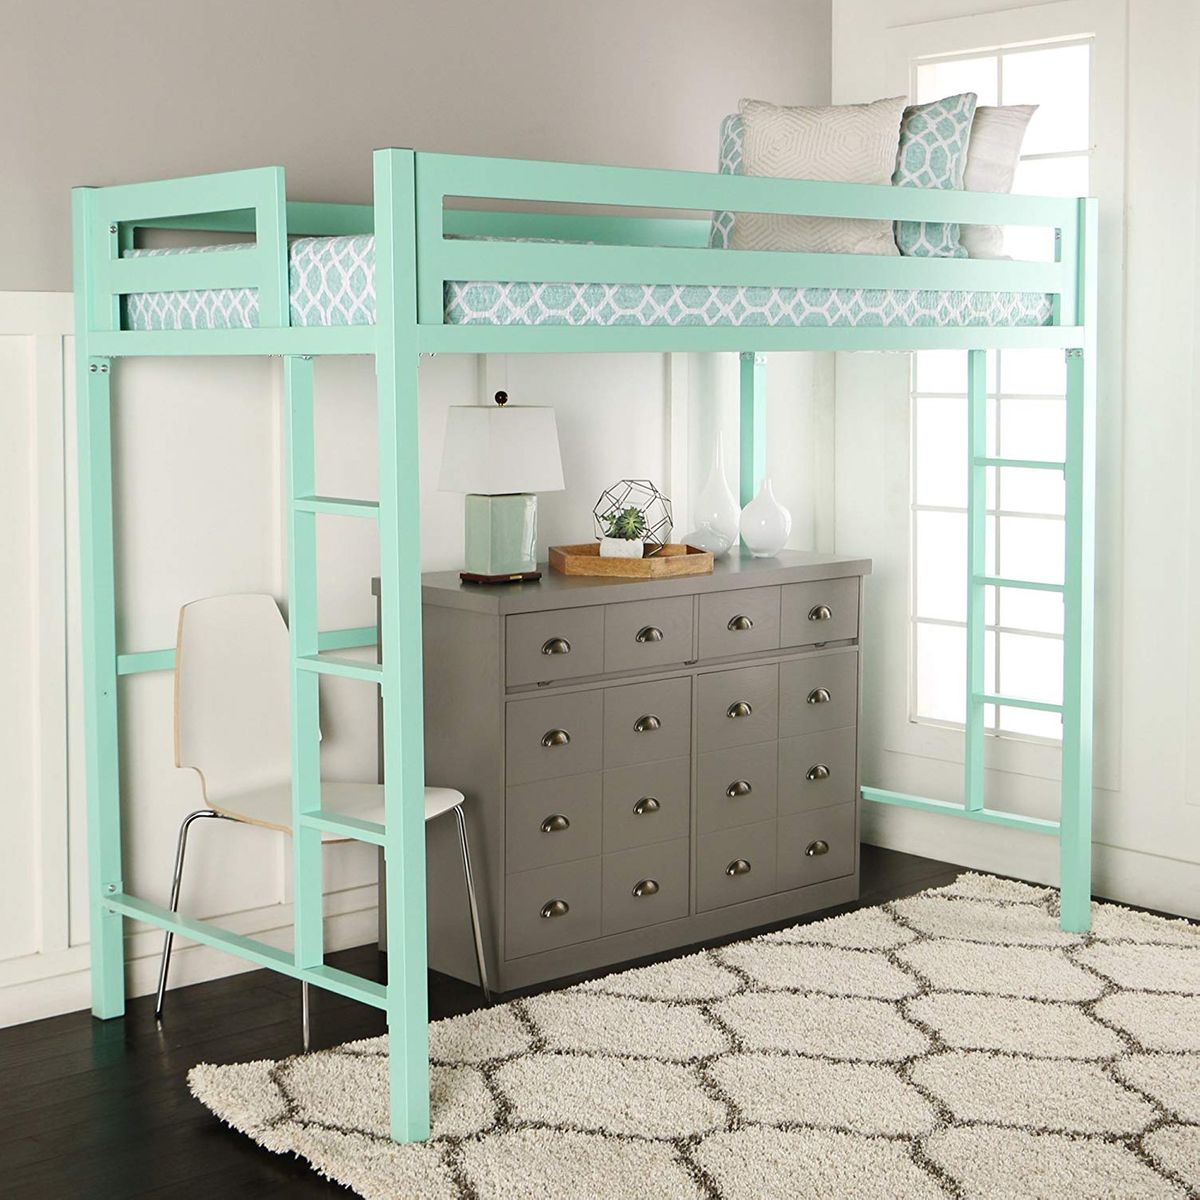 8 Best Loft Beds 2019 The Strategist, How Much Does Loft Beds Cost